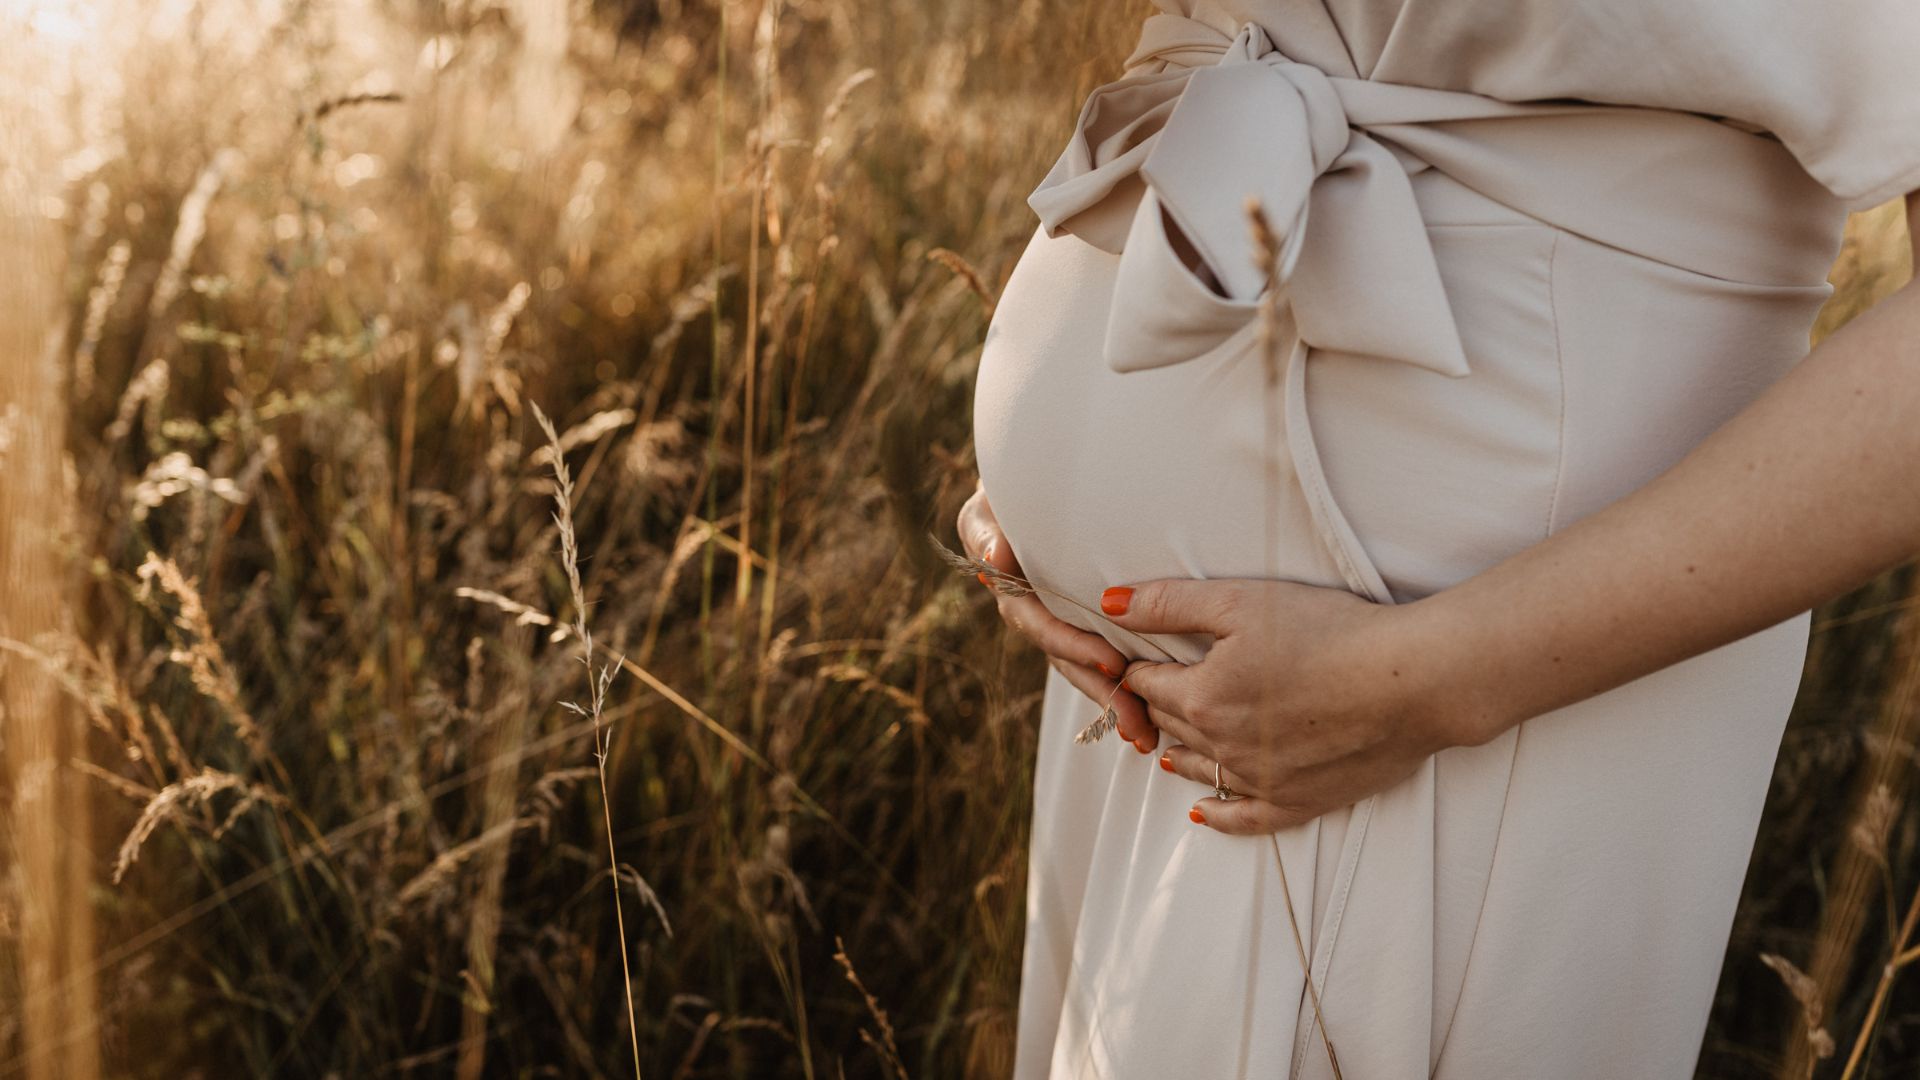 Midsummer, wedding, or celebration? Find the perfect maternity dress for the occasion!